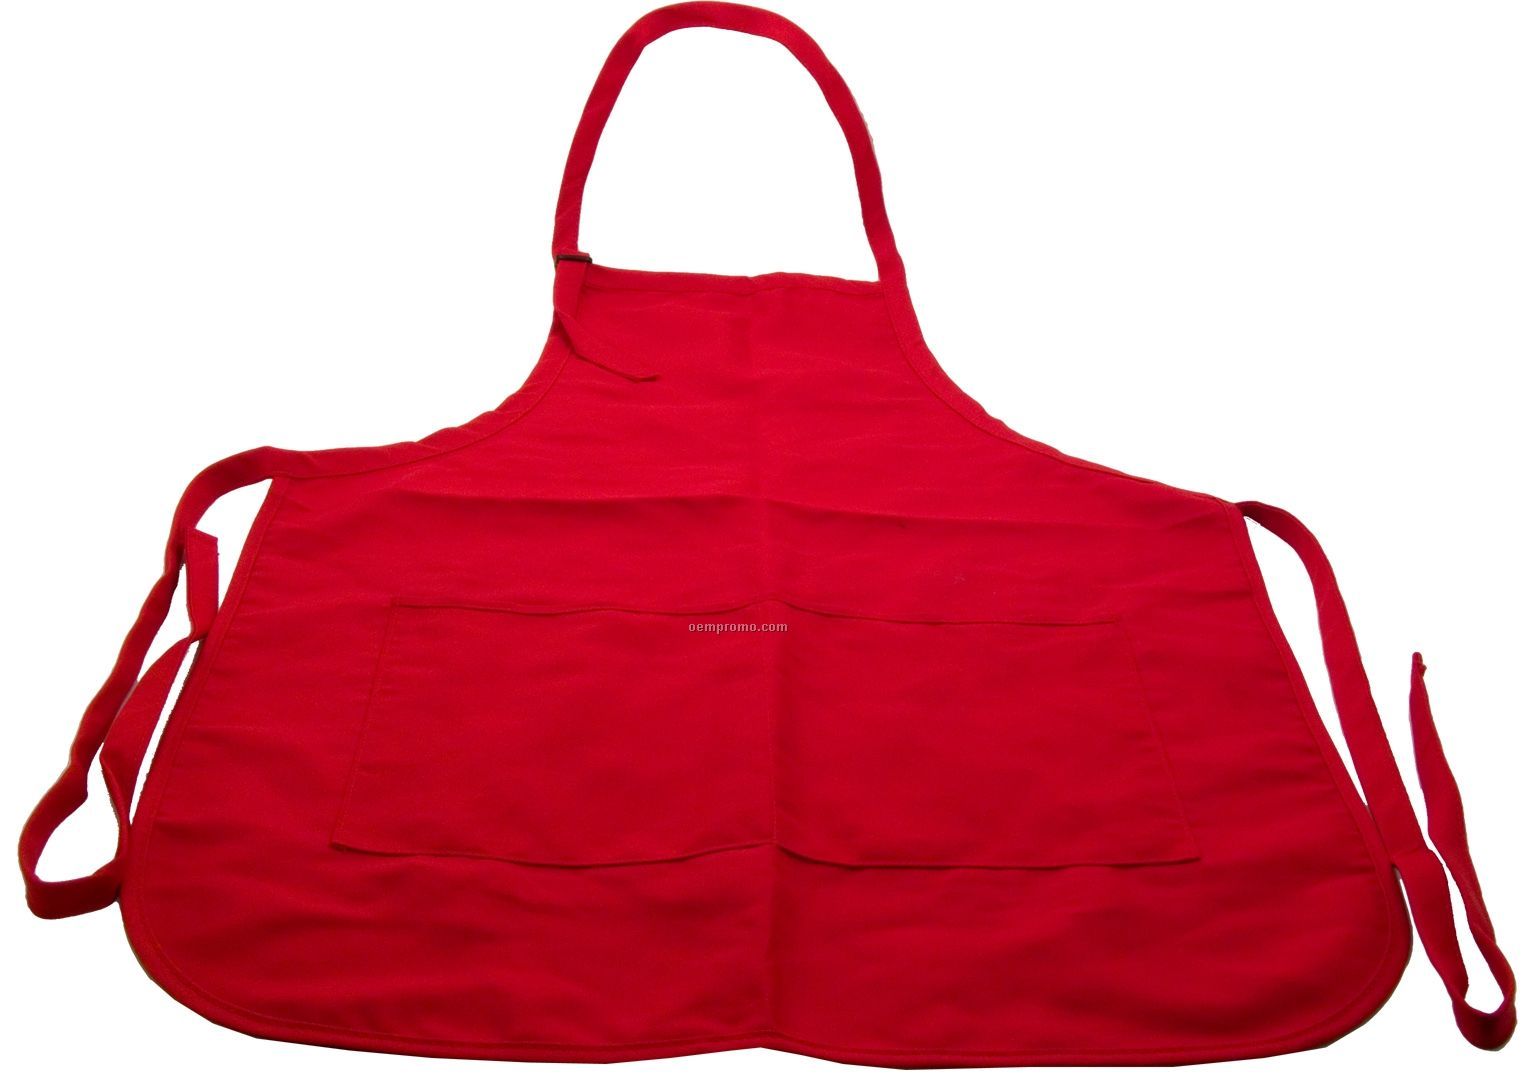 Long Apron - 28"X30" (Overseas 6-7 Week Delivery)